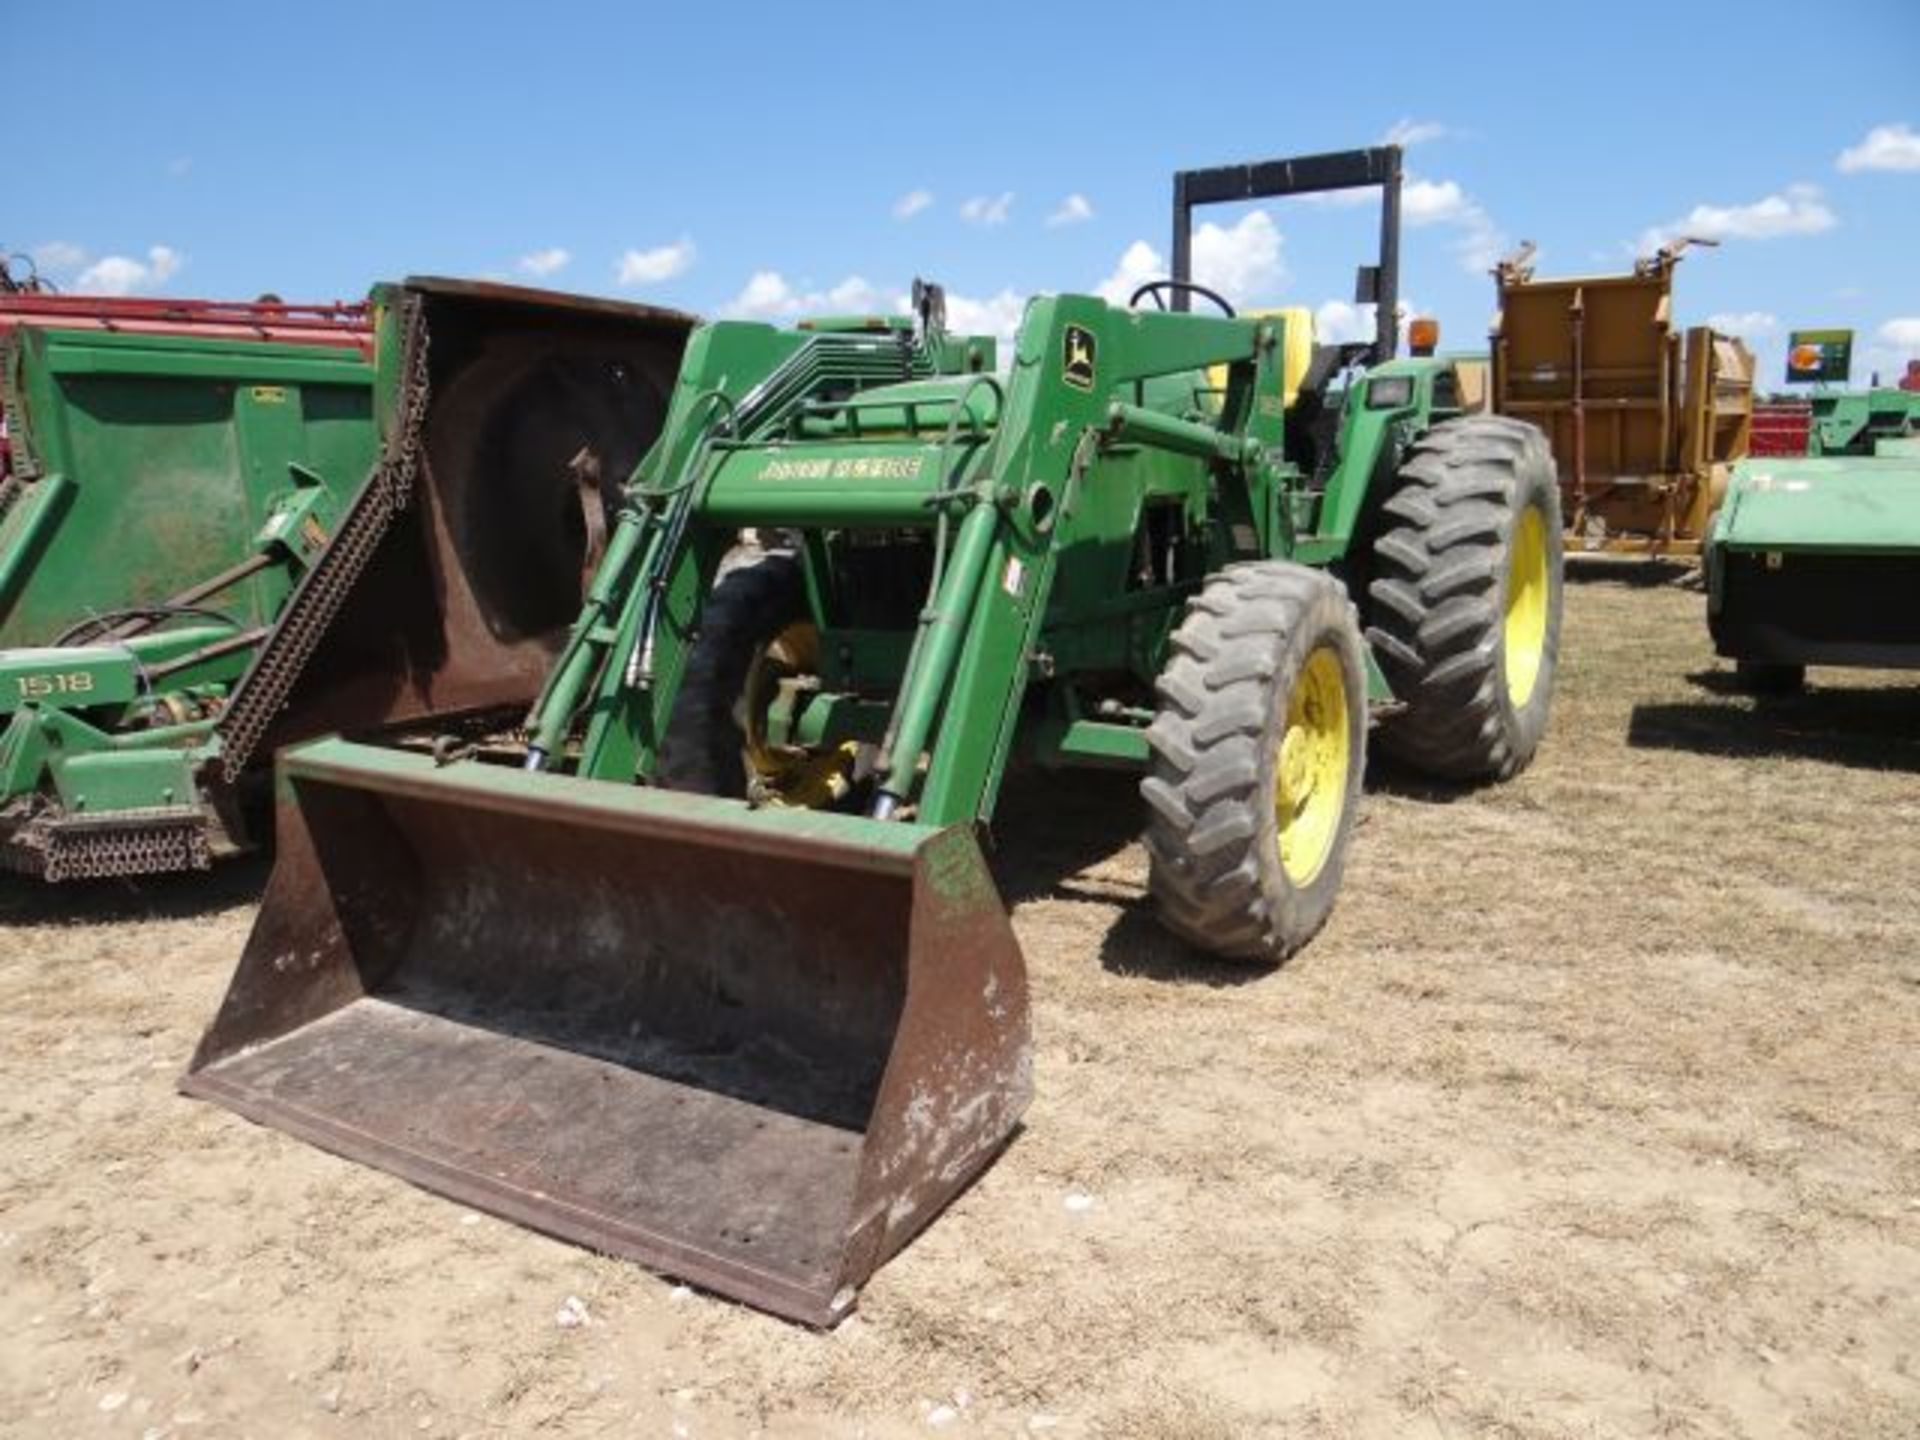 JD 6300 Tractor, 1995 8600 hrs, MFWD, OS, 3 SCVs, Dual PTO, w/JD 640 Loader and Bucket